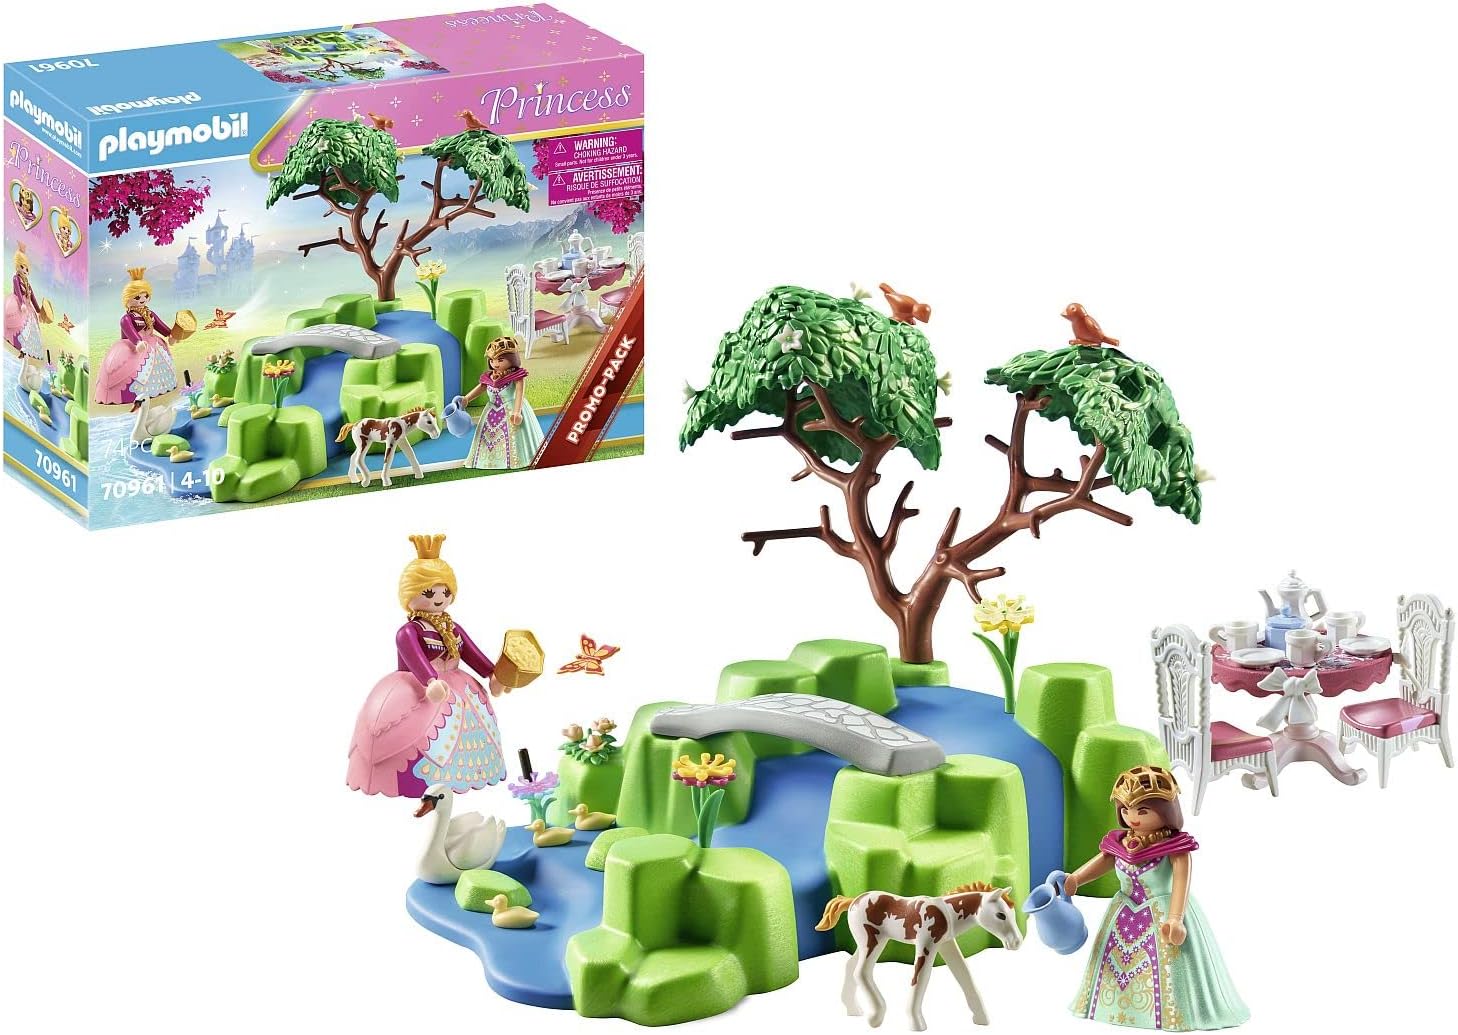 Playmobil Princess 70961 Promo Pack Princess Picnic with Foal, Fairytale Princess with Swan Family, Fairy Tale Toy for Children from 4 Years